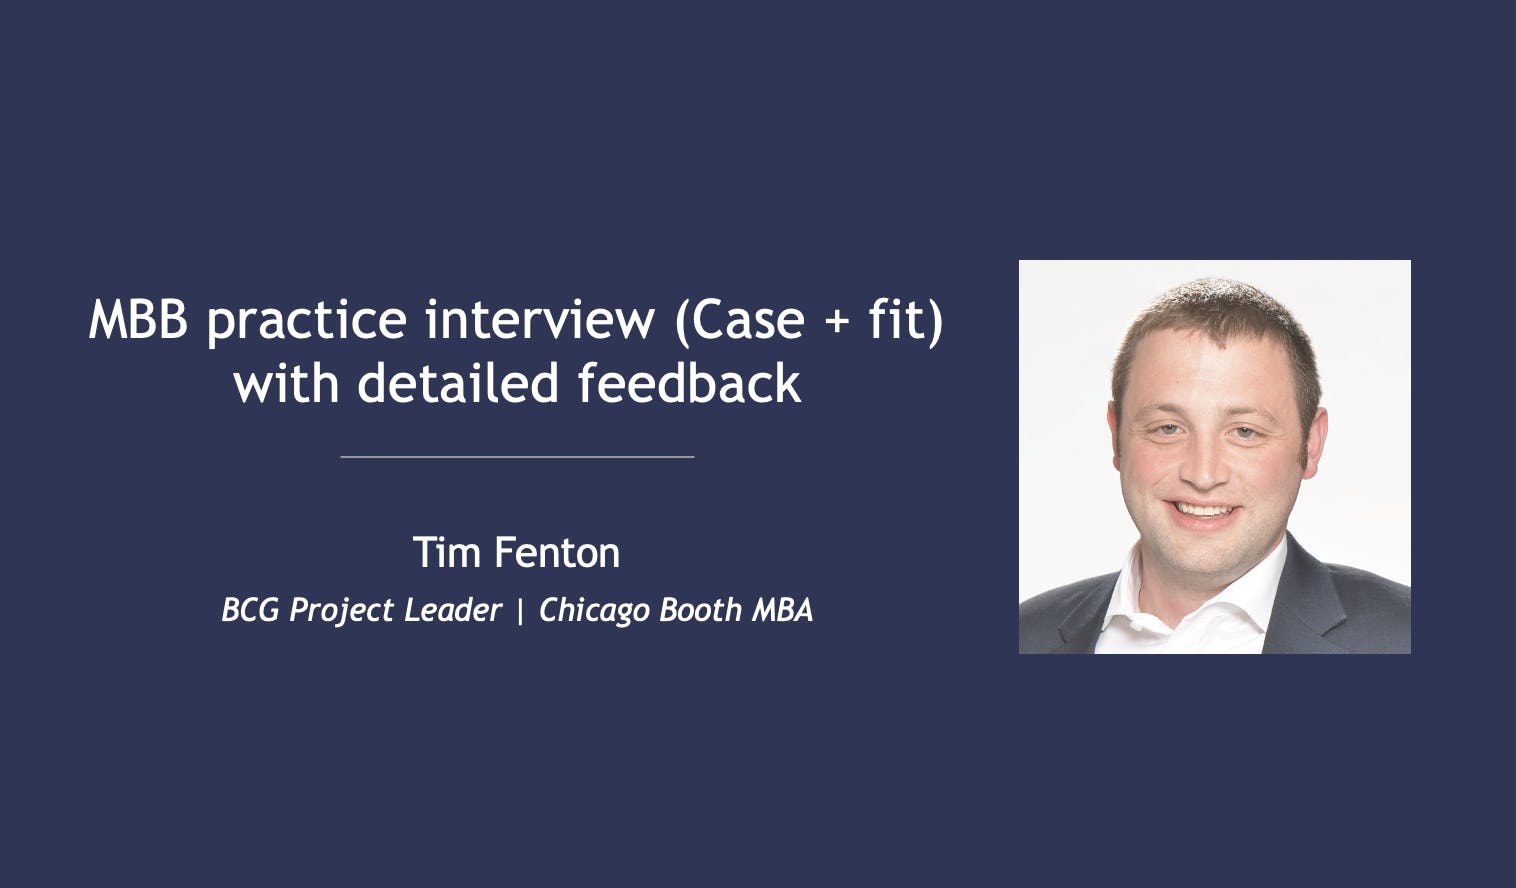 MBB practice interview (Case + fit) with detailed feedback